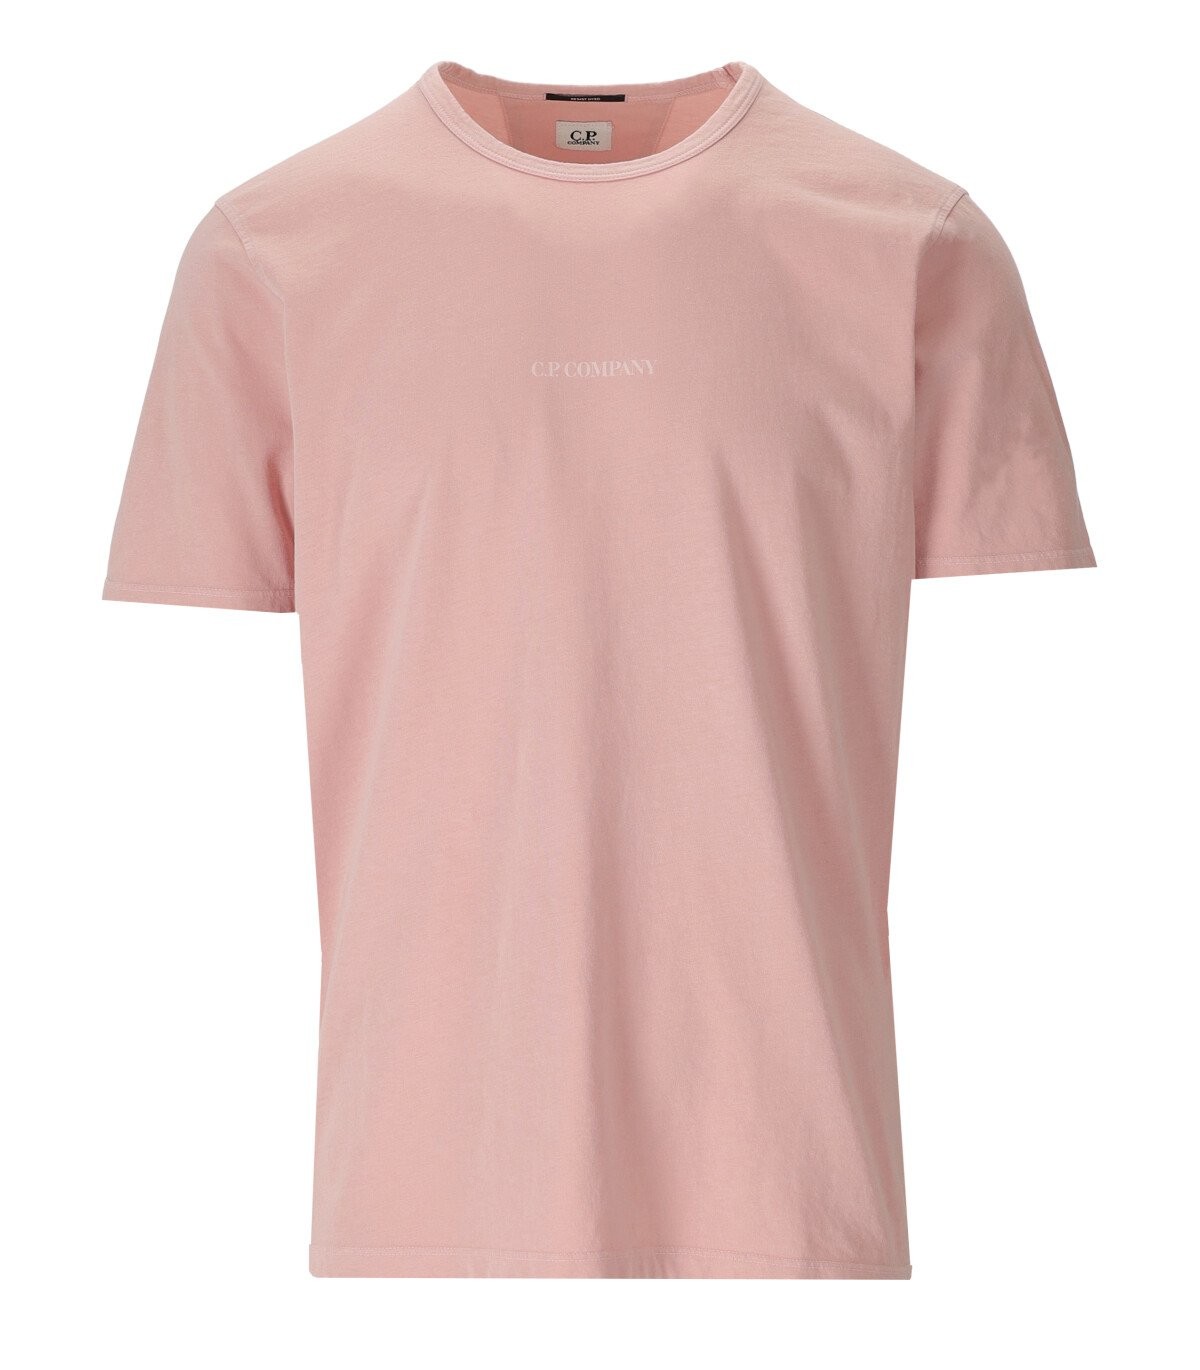 C.P. COMPANY JERSEY 24/1 RESIST DYED PINK T-SHIRT